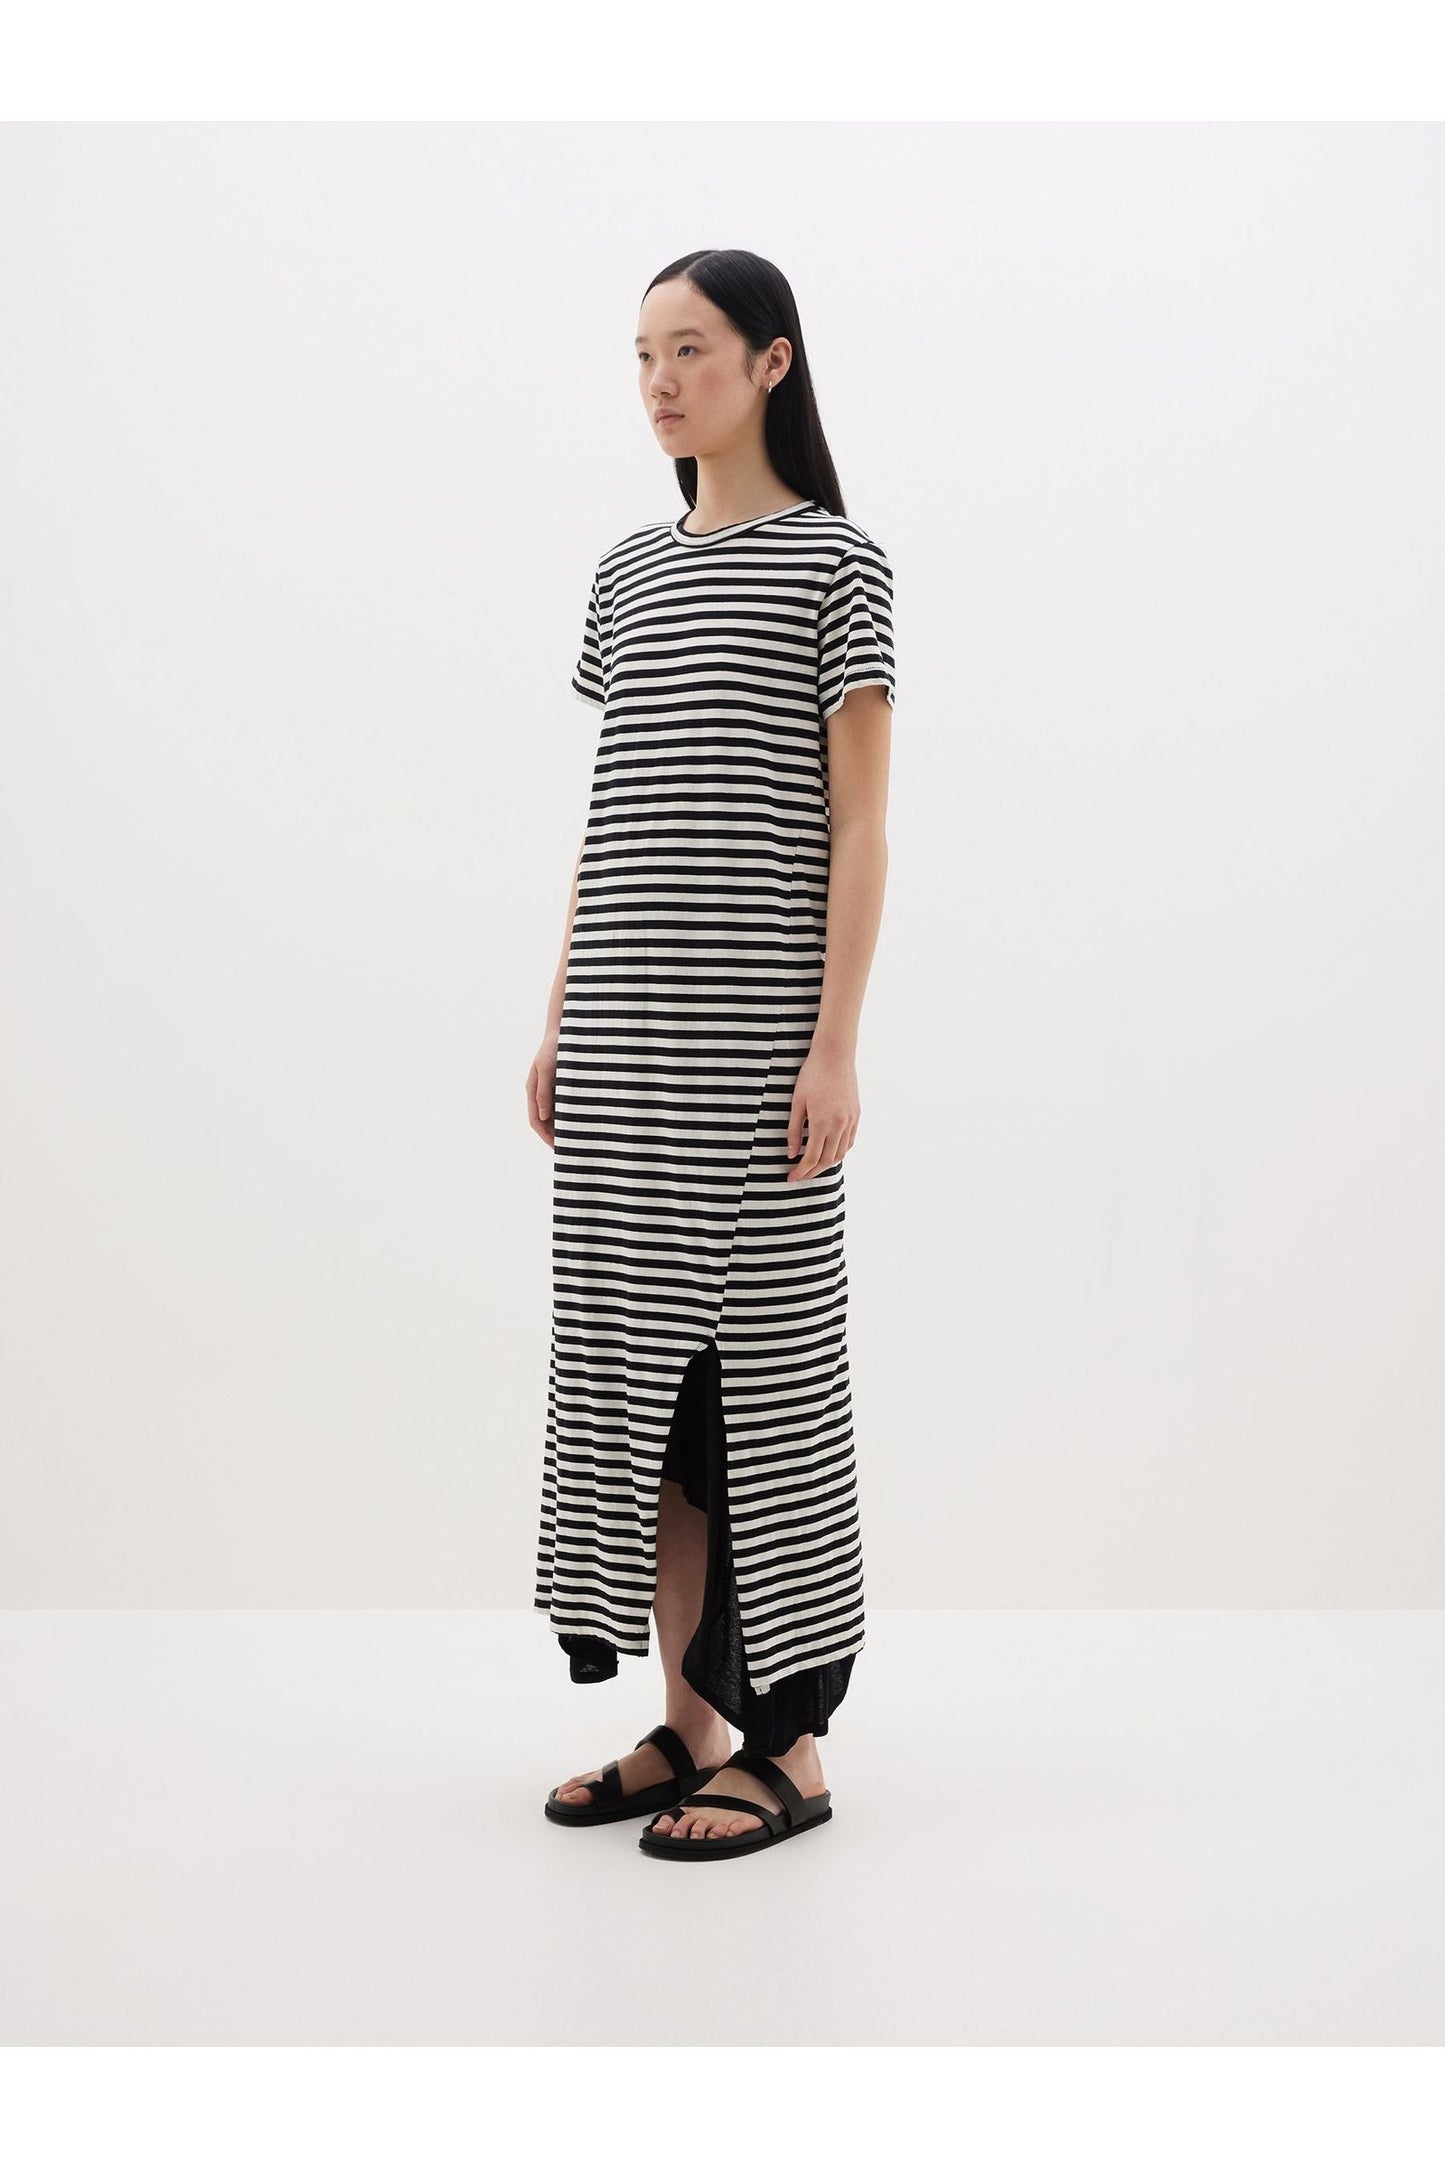 Stripe Heritage Short Sleeve T-shirt Dress in Black / Undyed by Bassike